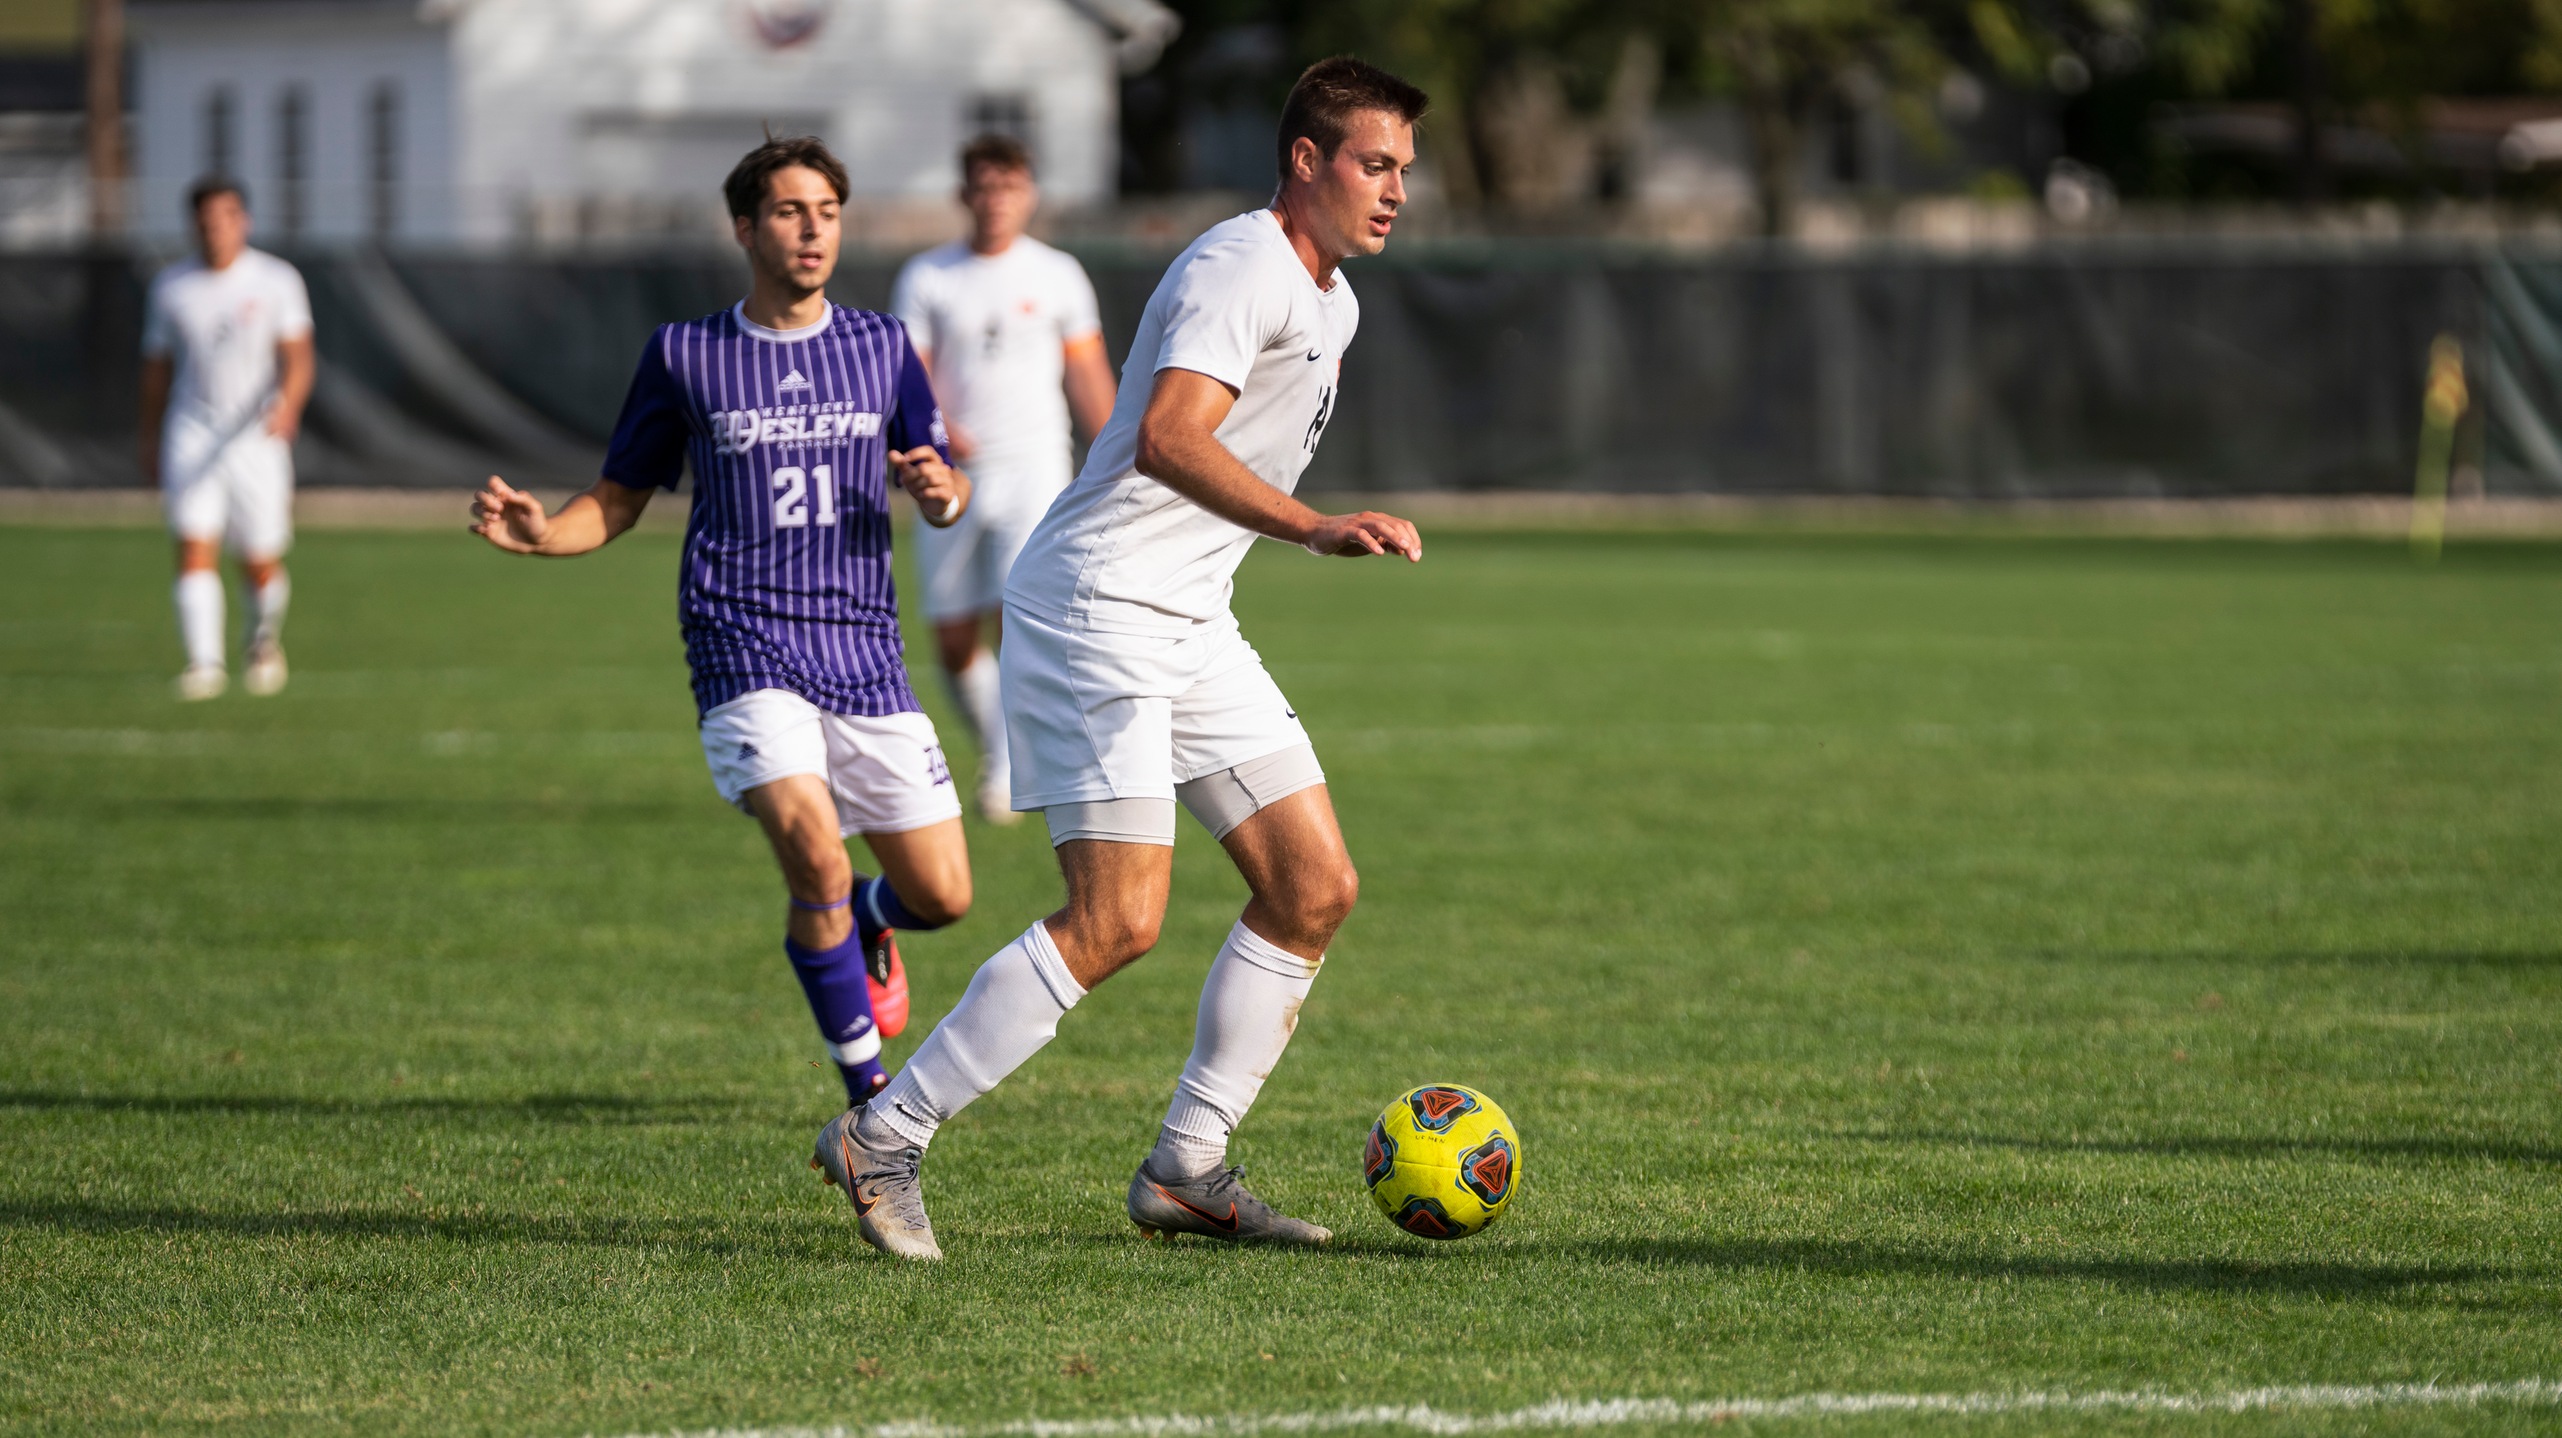 Soccer player in white controlling the ball with player in purple in the  background